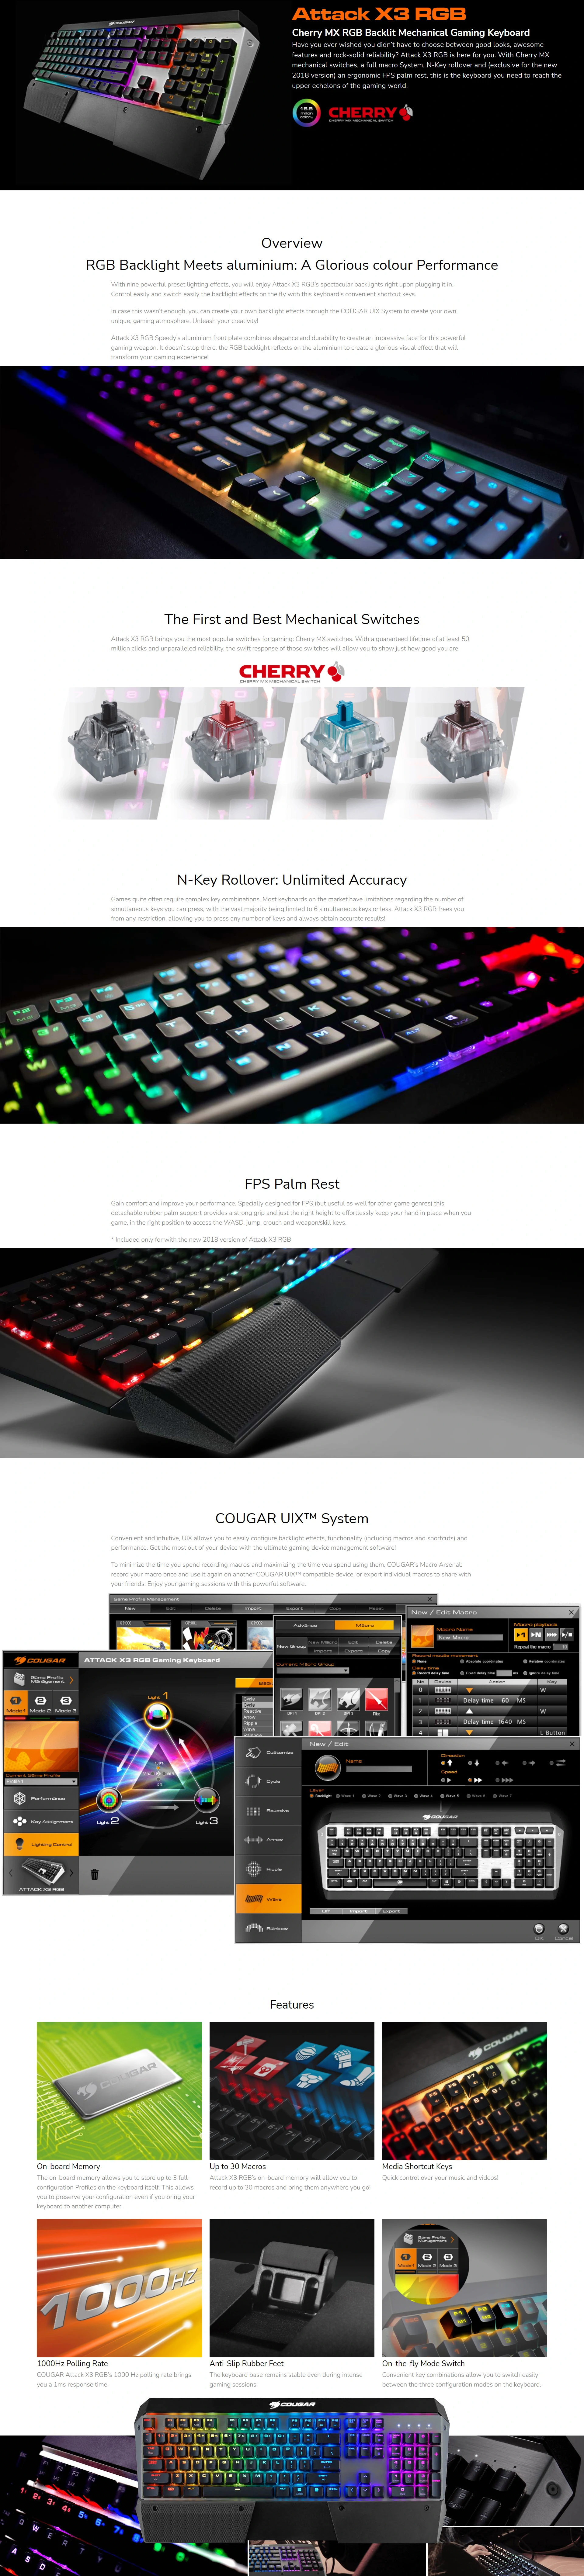 Overview - Cougar - Attack X3 RGB - Cherry MX RGB Backlit Mechanical Gaming Keyboard